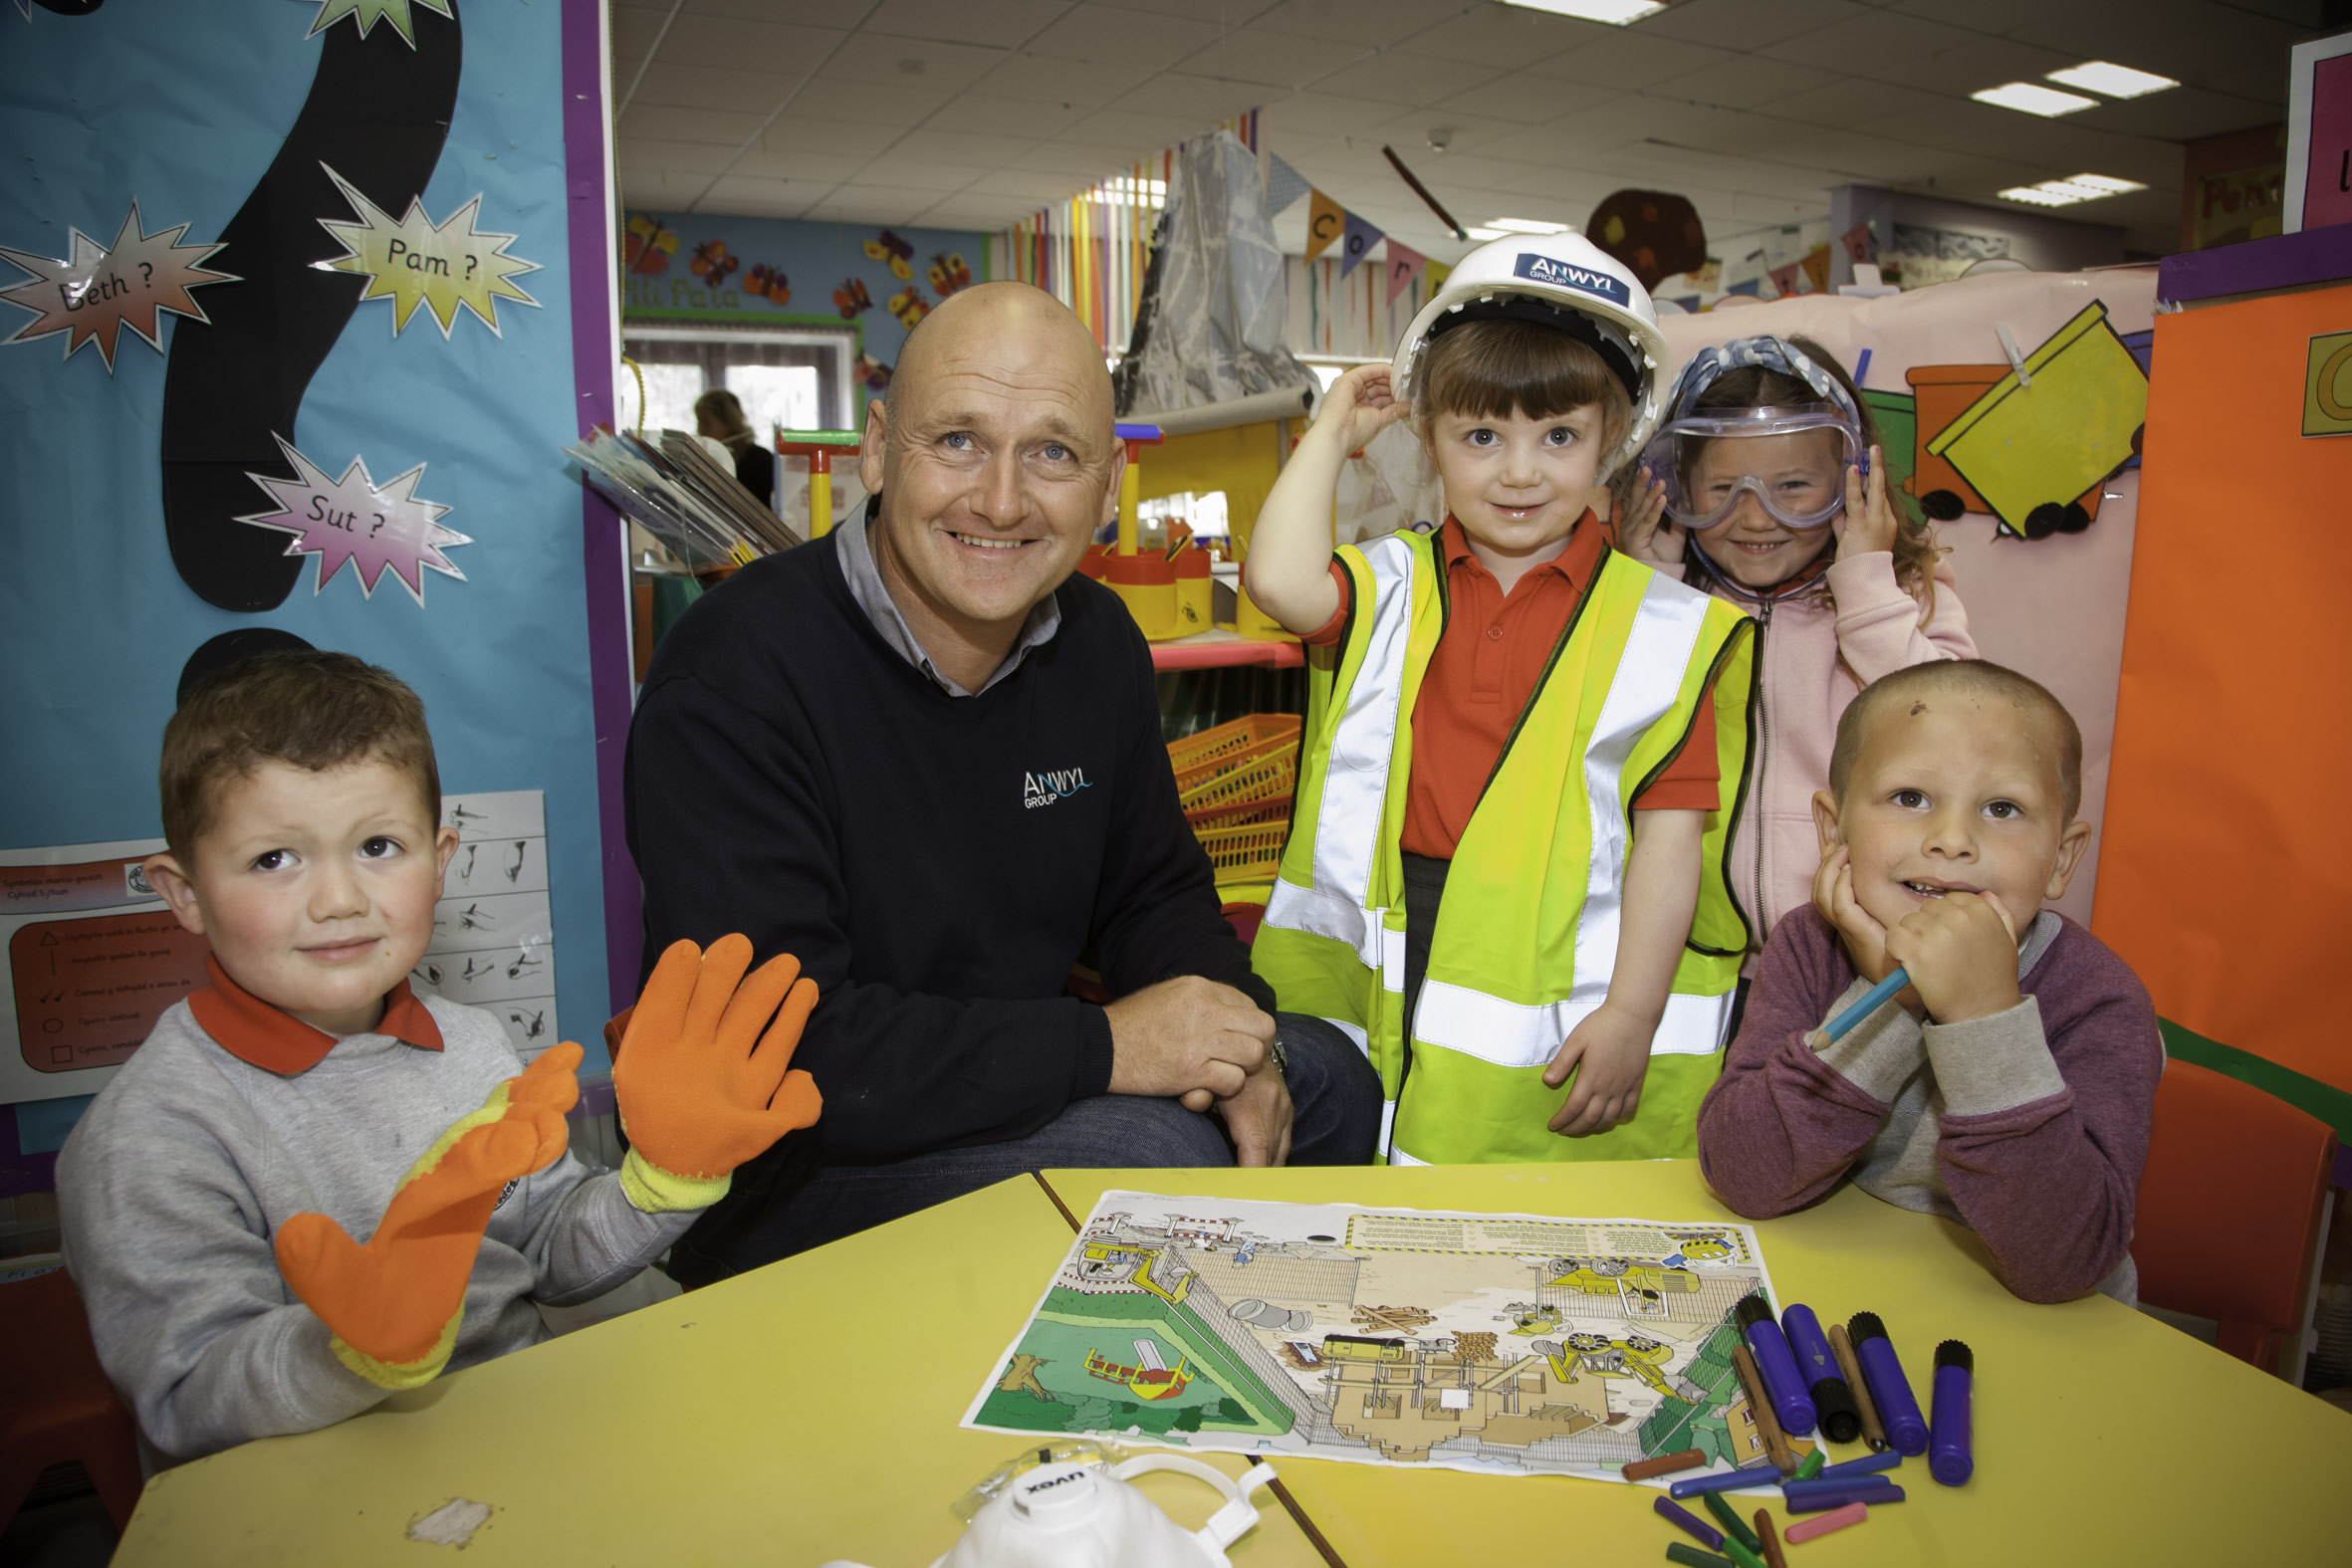 Pupils put on hard hats for a safety lesson from Bob the Builder